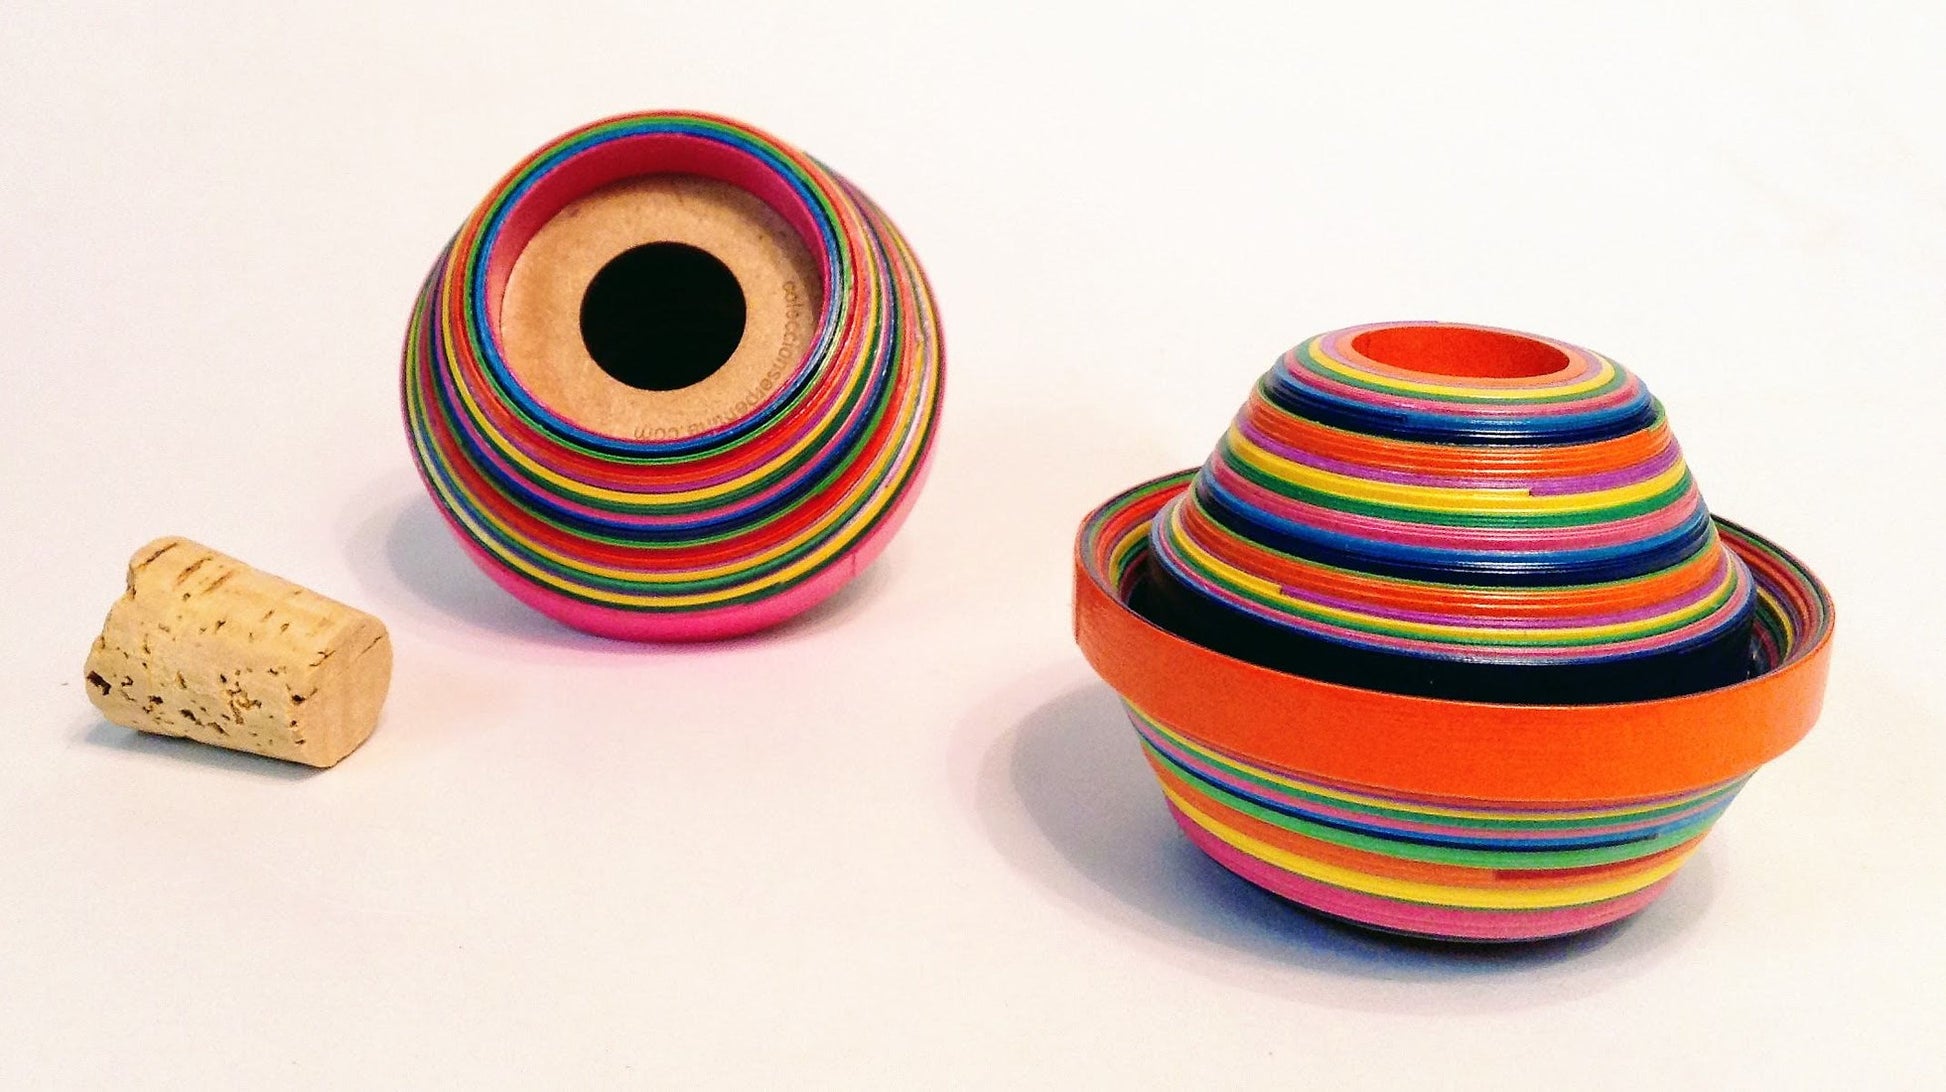 Multicolored serpentine salt and pepper shaker with a cork on the right side